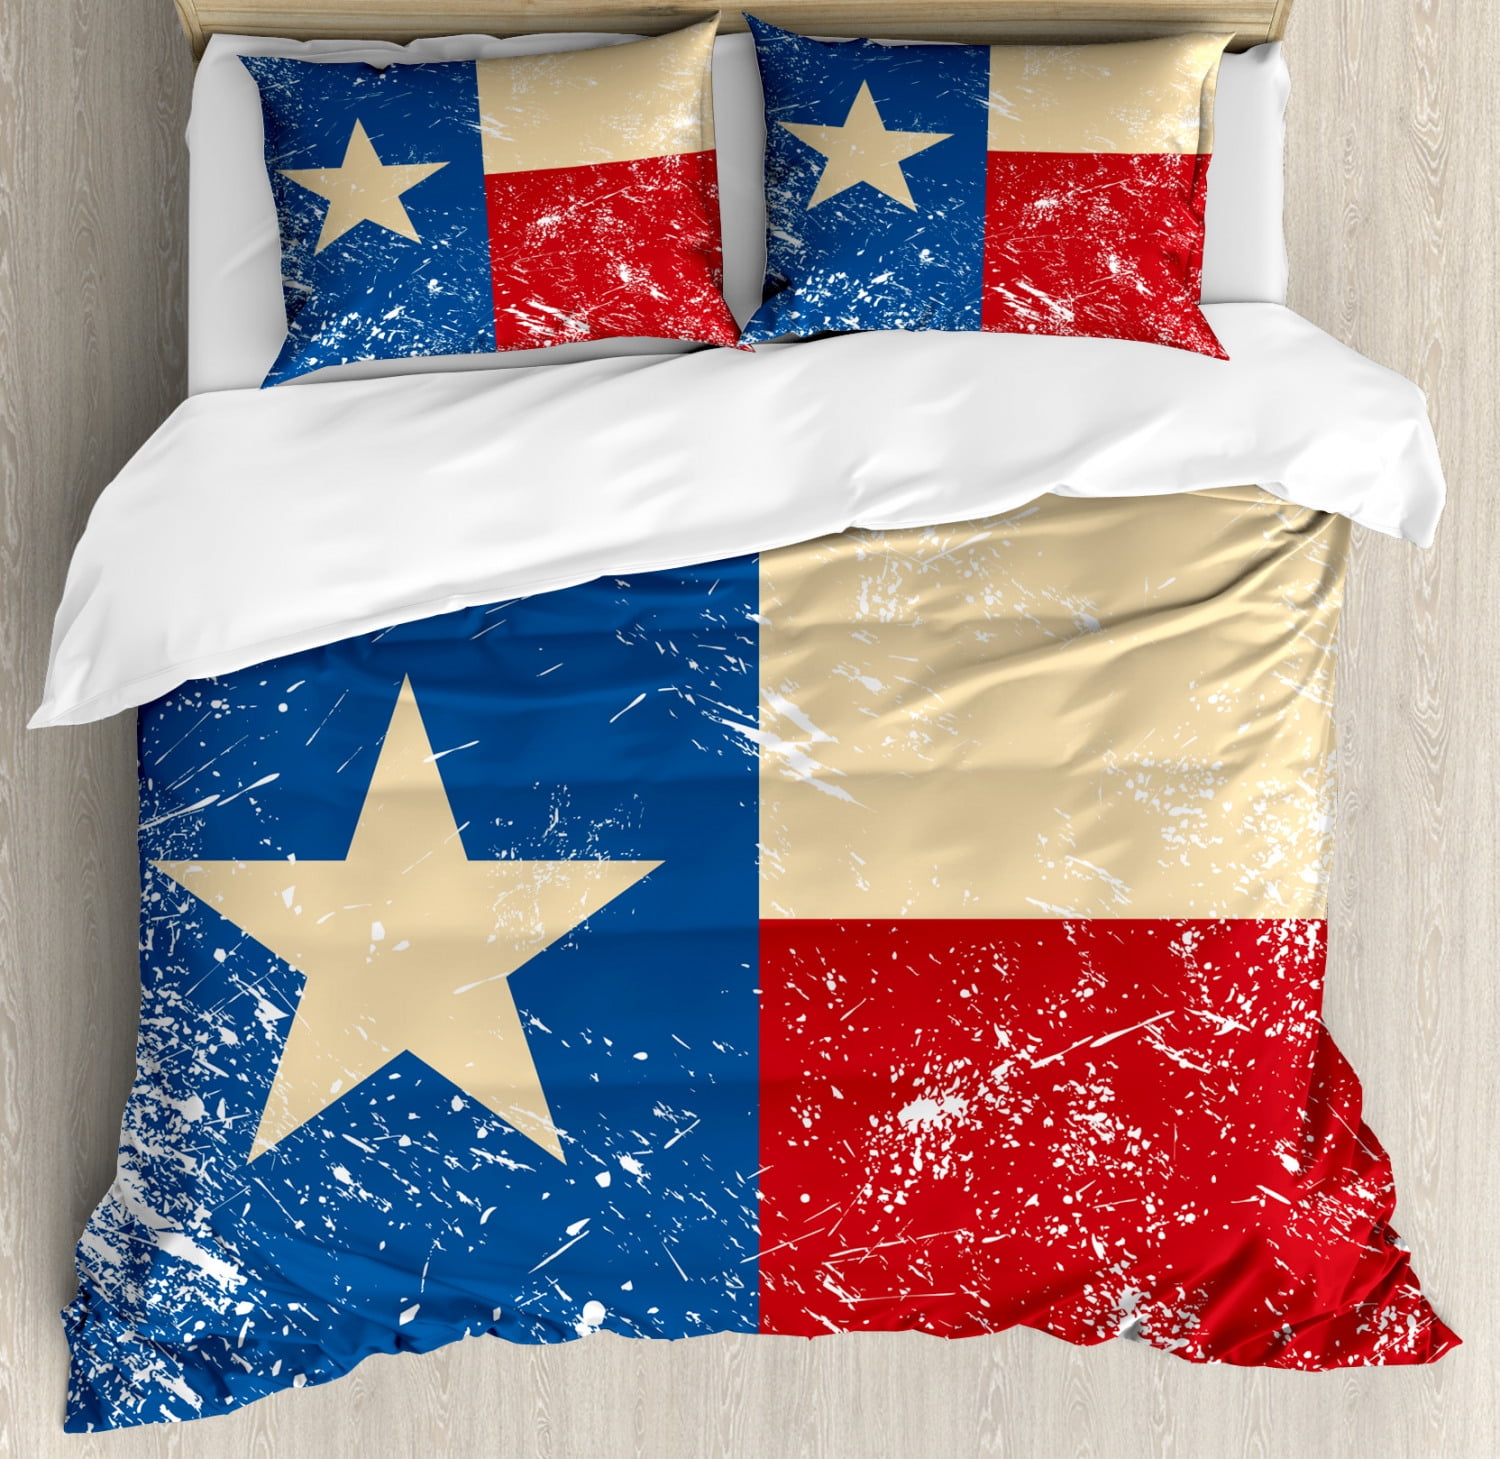 Texas Star Duvet Cover Set King Size, Blue And Gold King Size Duvet Cover Sets